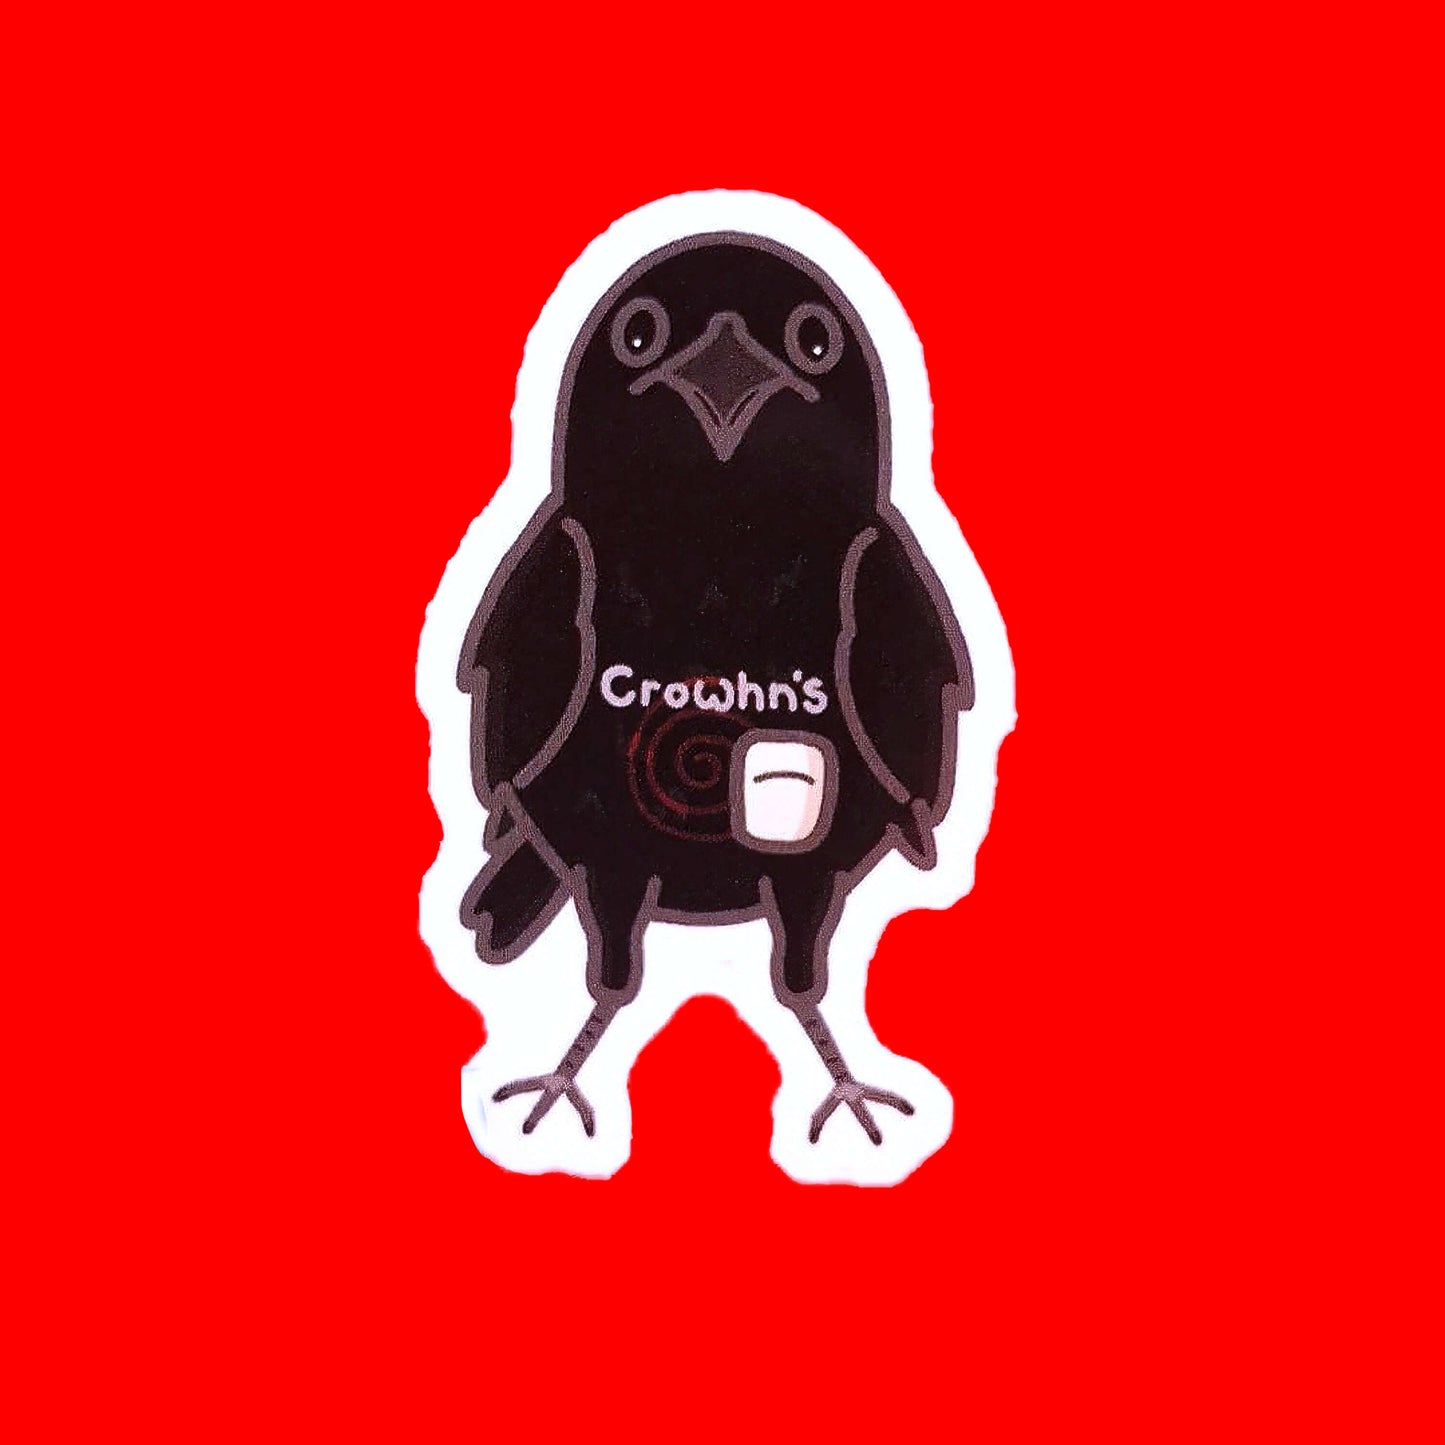 The Crowhn's Sticker - Crohn's Disease on a red background. The black crow shaped sticker has a stoma bag fitted with a red swirl and white text reading 'crowhn's' across its belly. The design is raising awareness for crohn's disease.